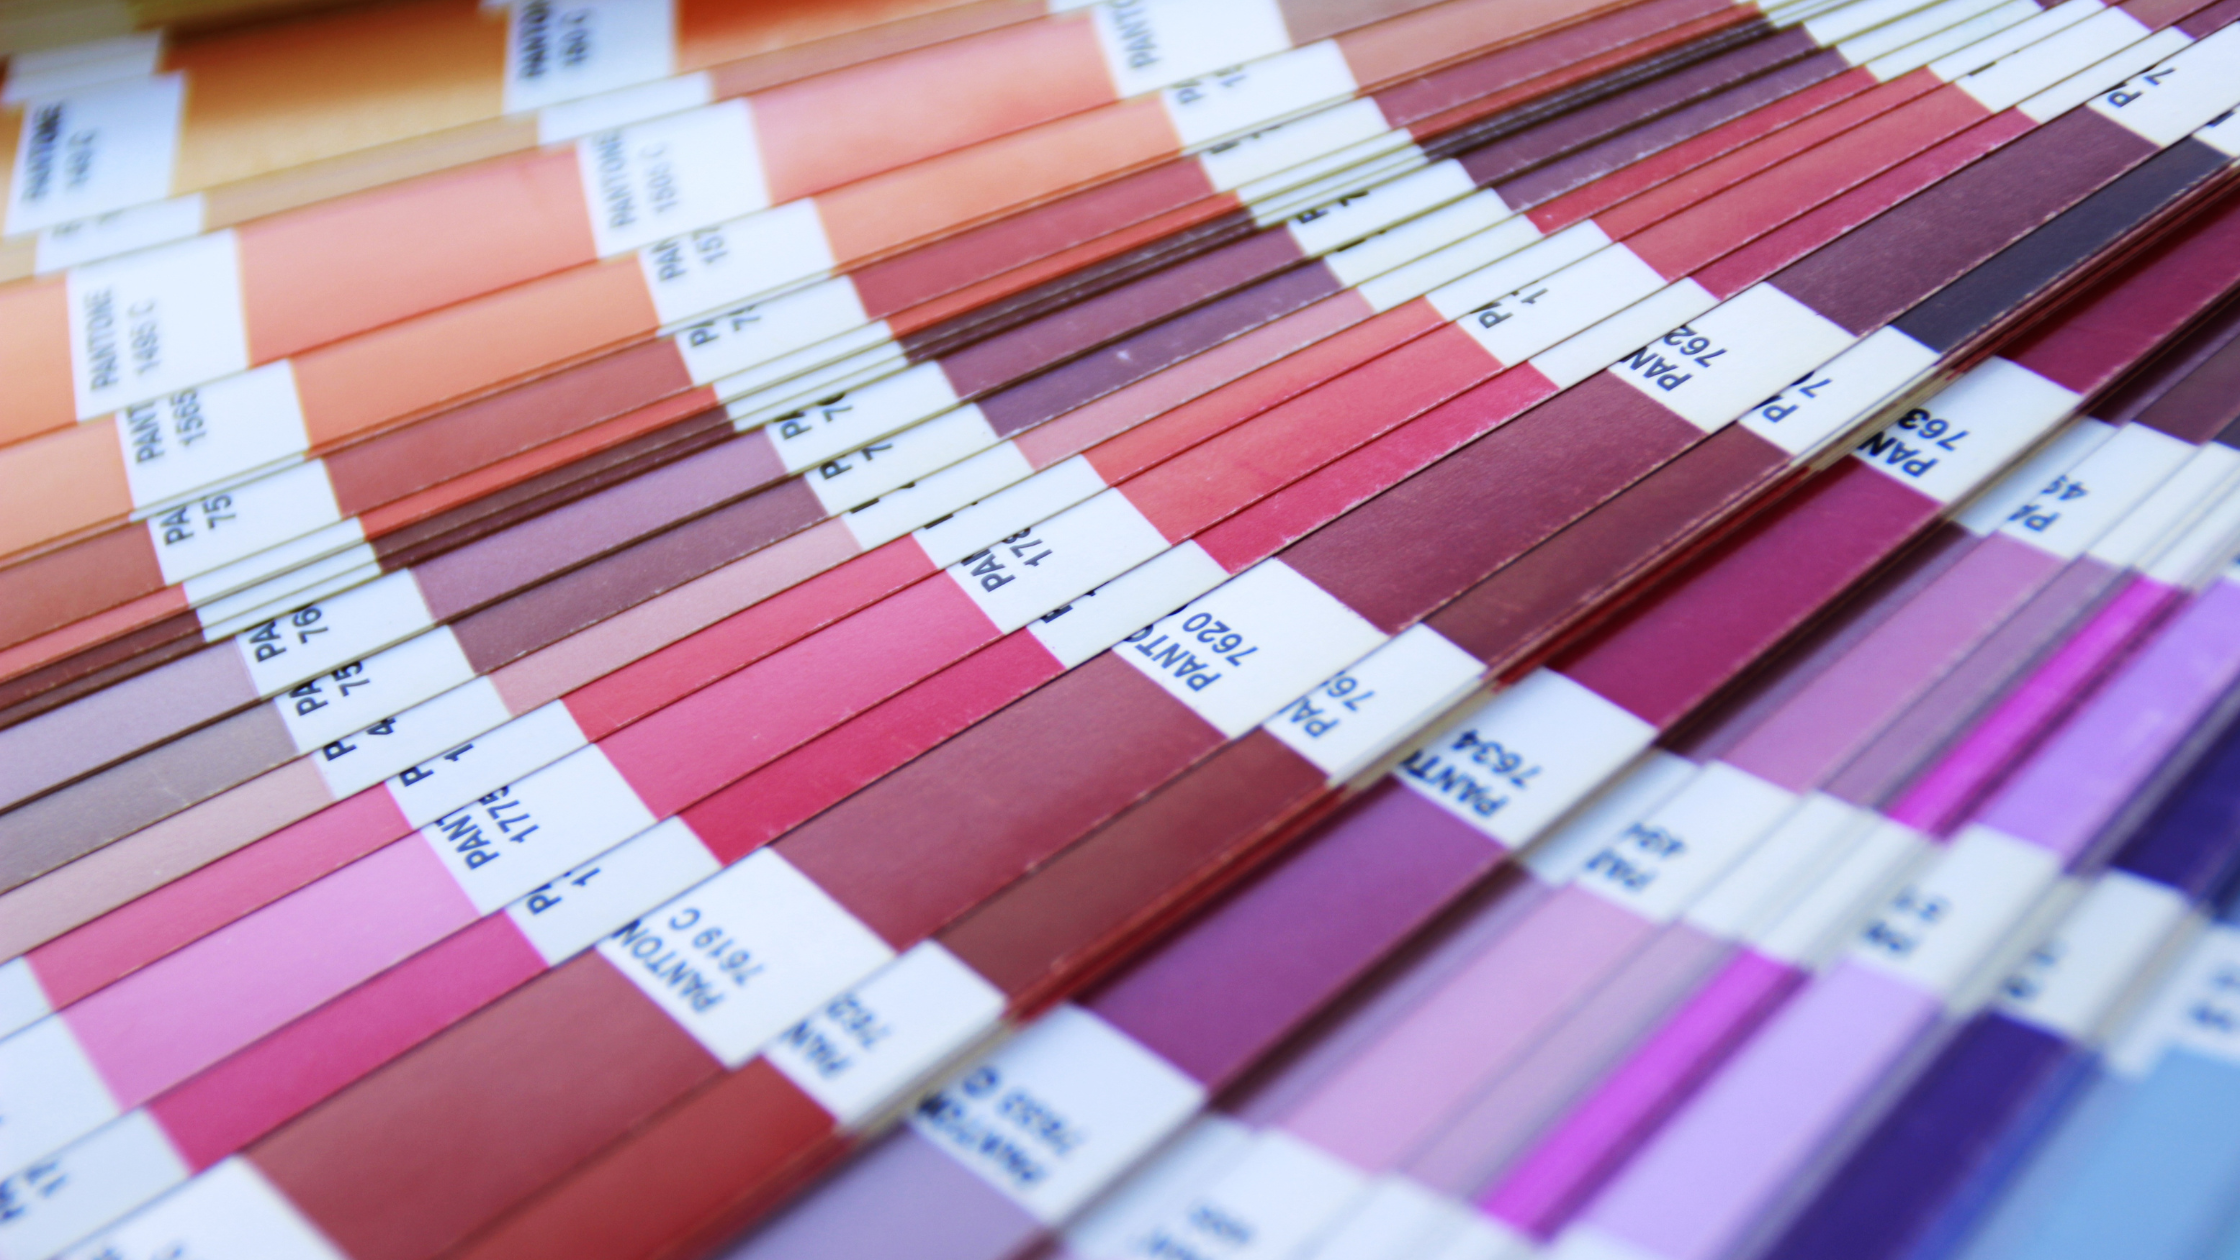 Three Reasons Why You Shouldn’t Use Pantone Colors for Touch-Up Paint